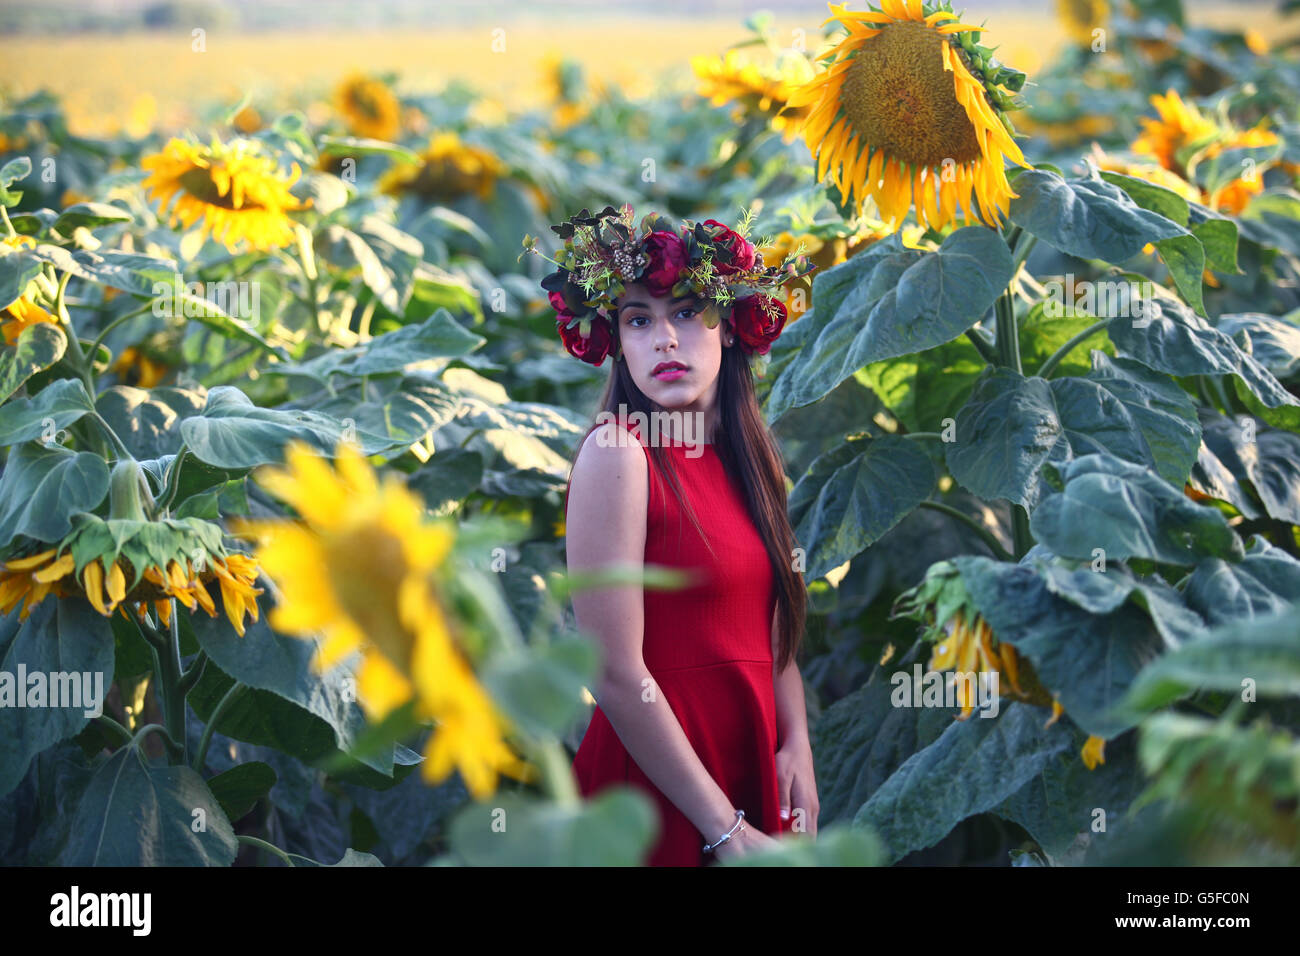 Preteen with wreath in a field of sunflowers Stock Photo